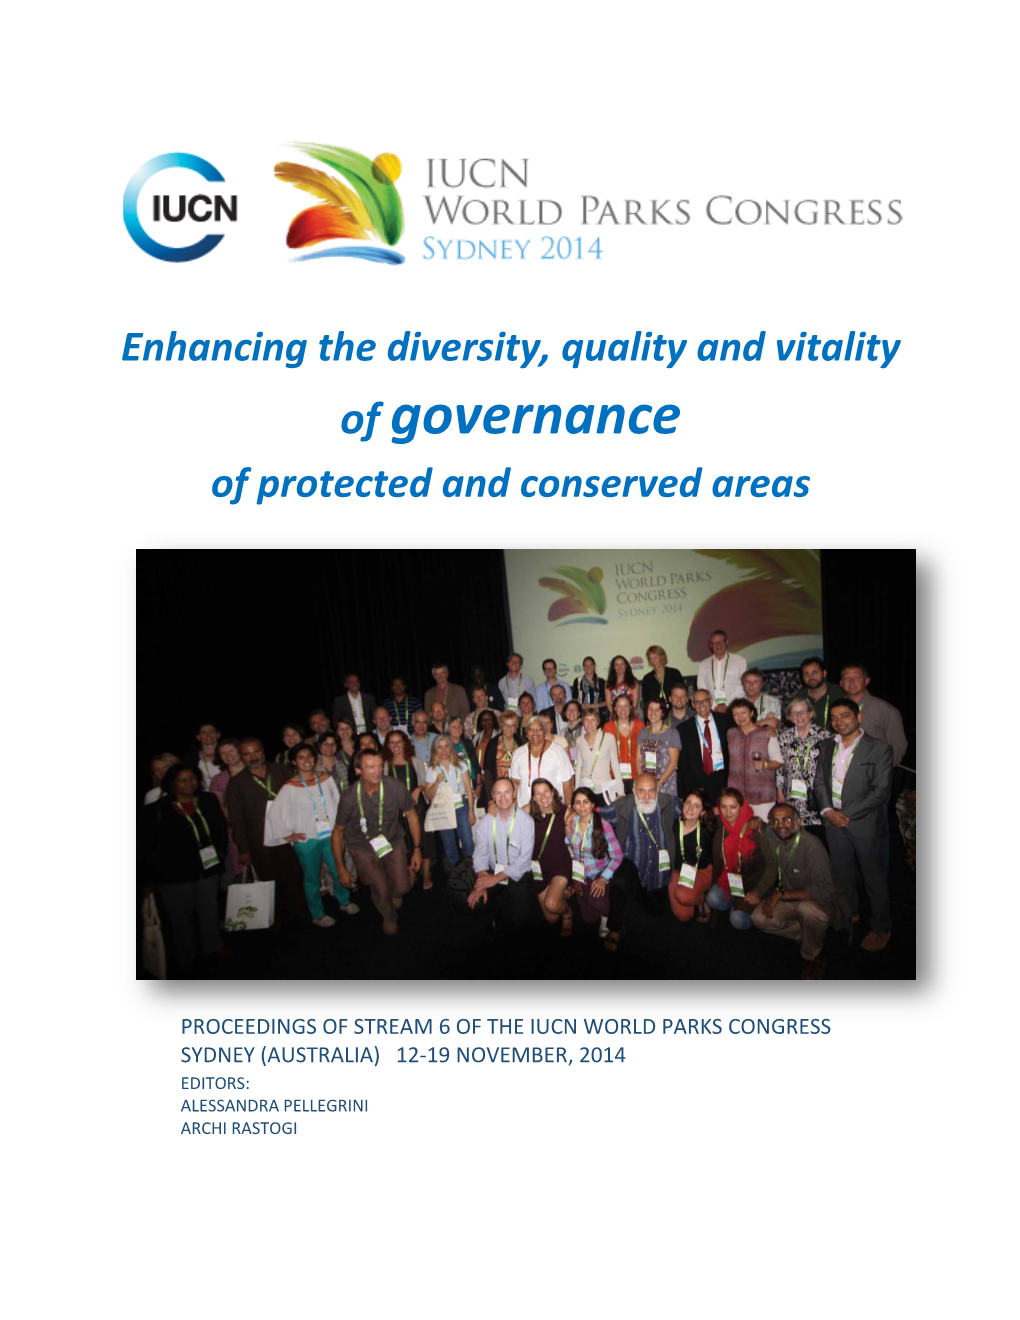 Enhancing the Diversity, Quality and Vitality of Governance of Protected and Conserved Areas